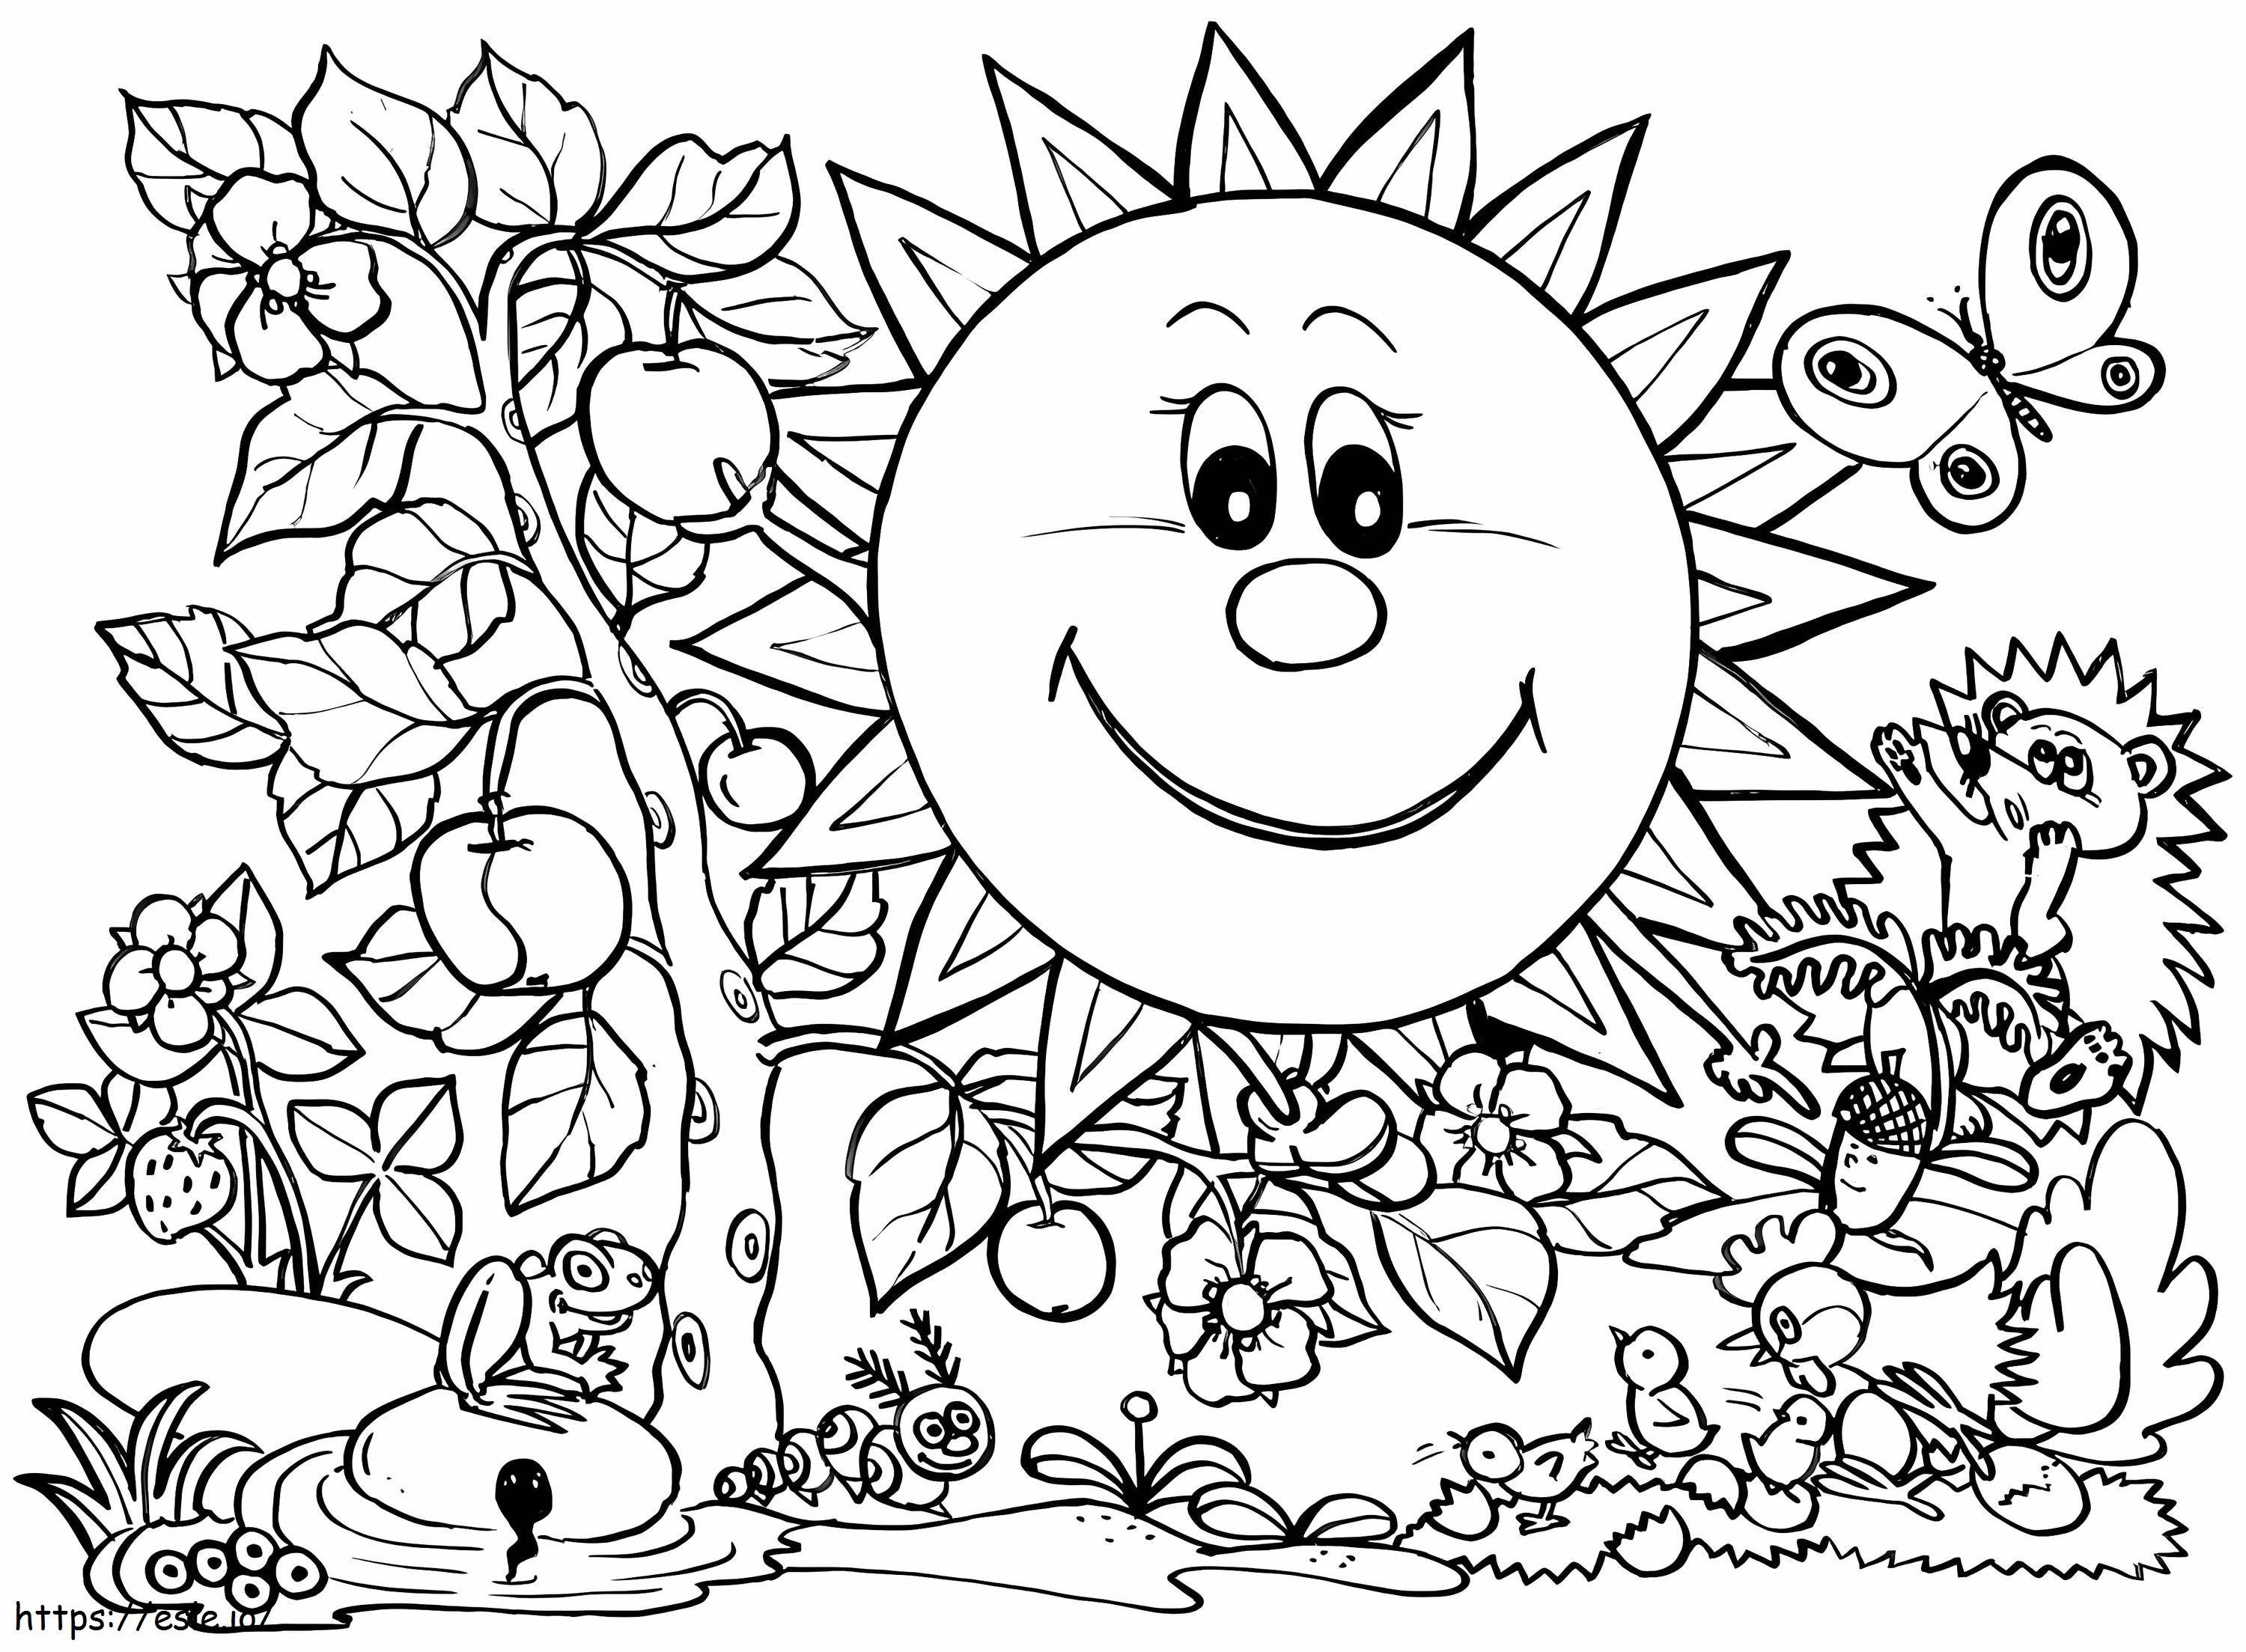 Printable Spring coloring page